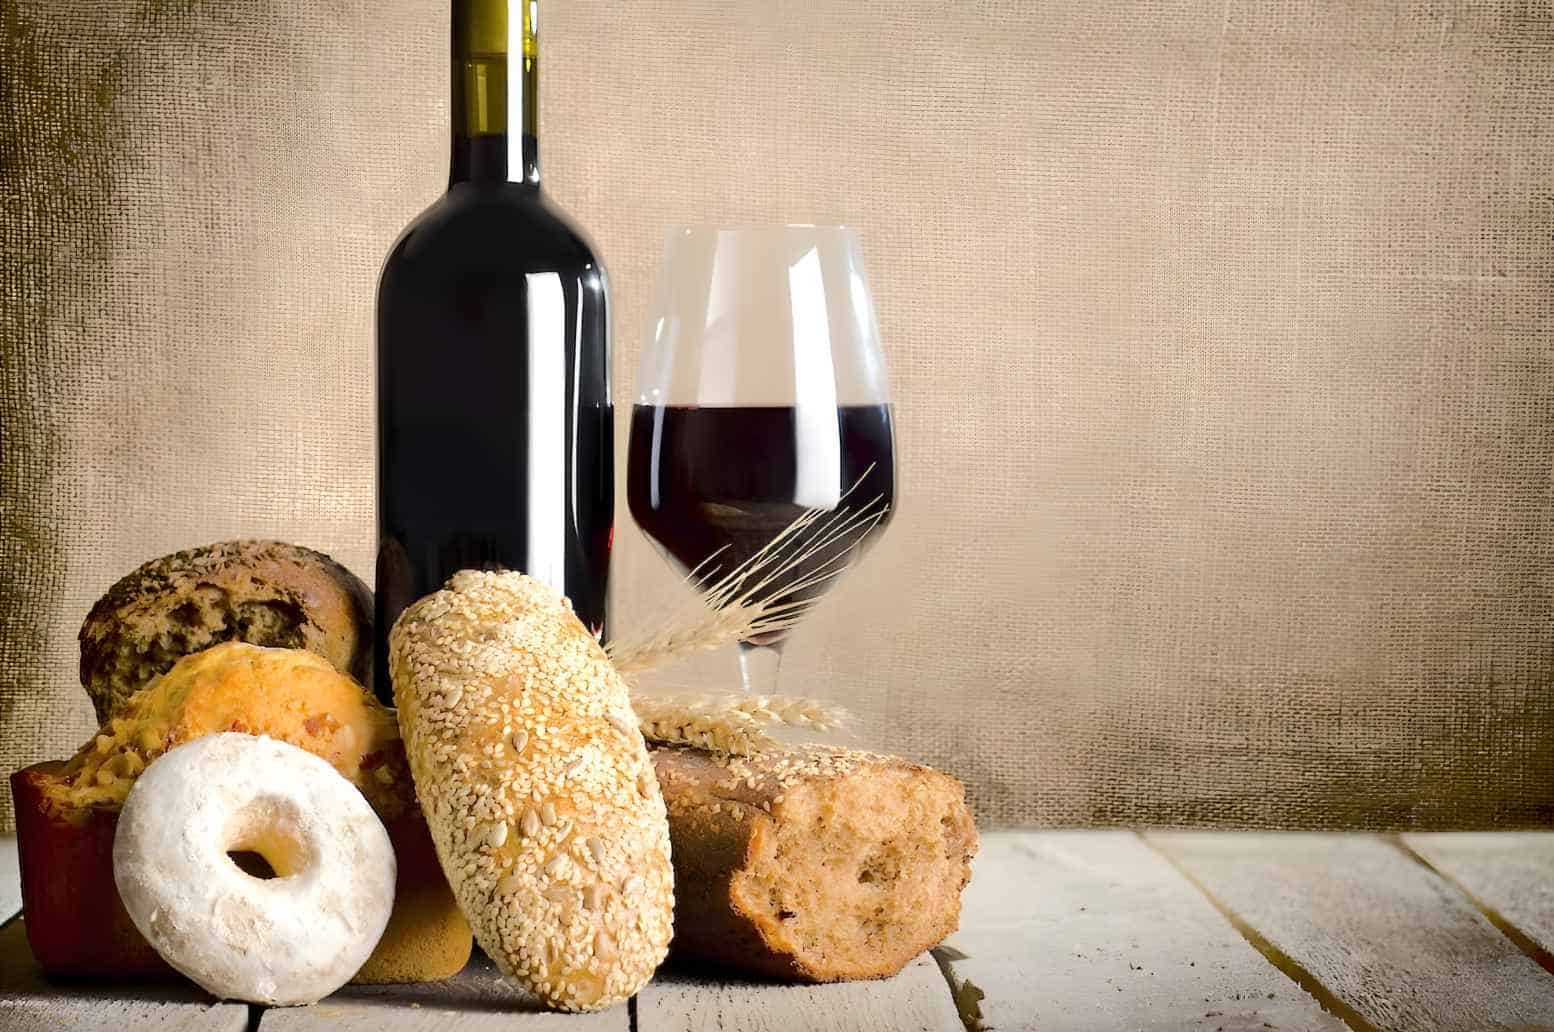 Bread with wine